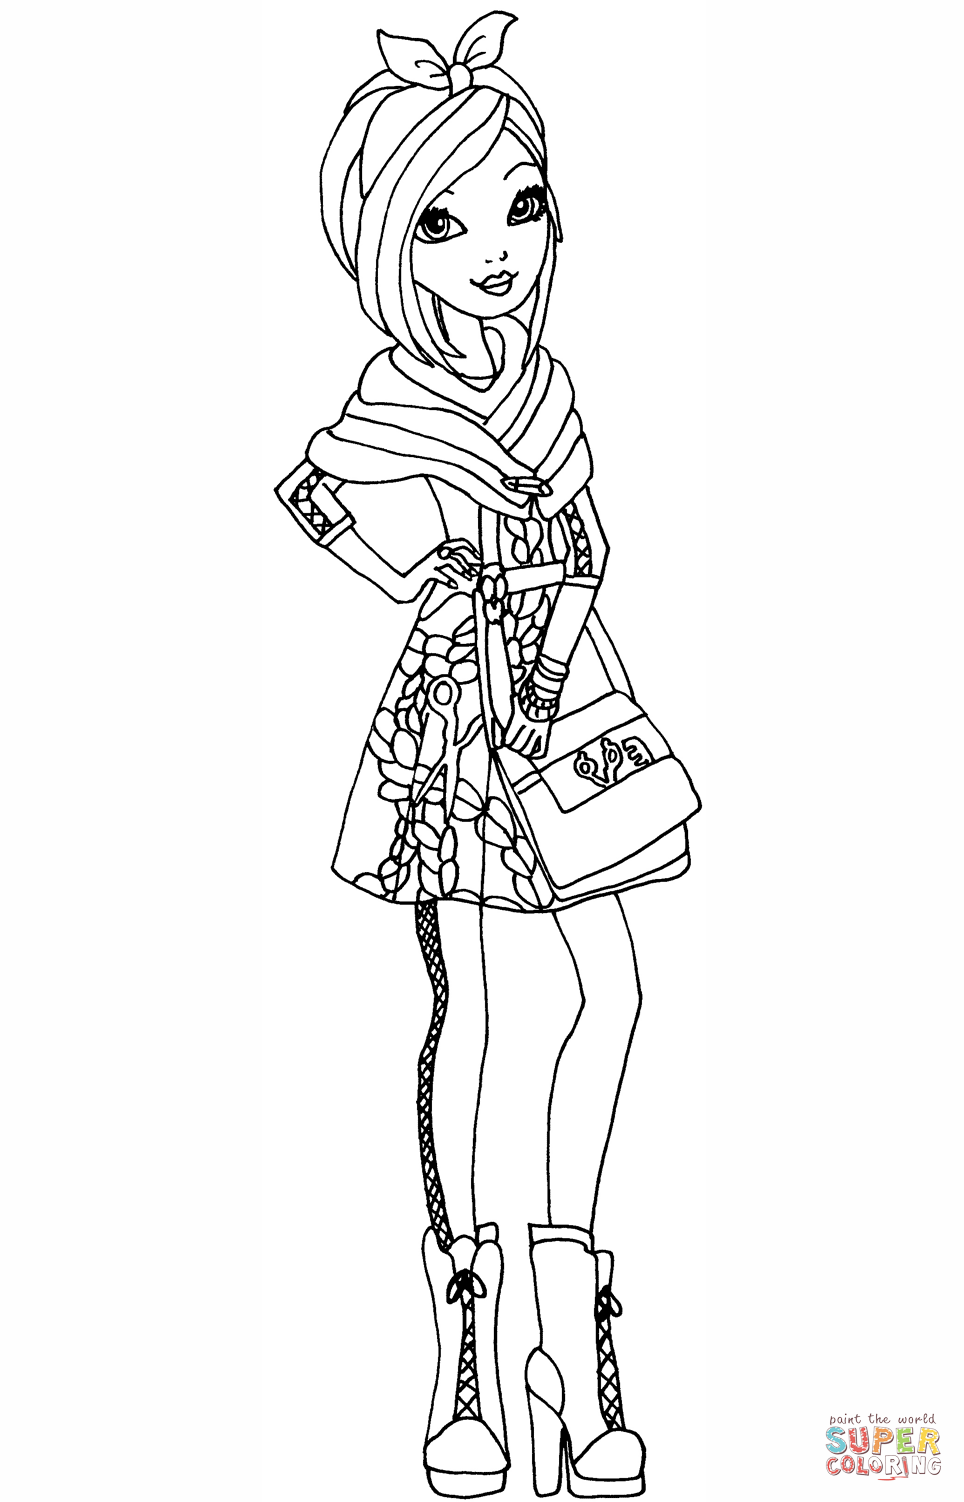 Ever after high poppy ohair coloring page free printable coloring pages